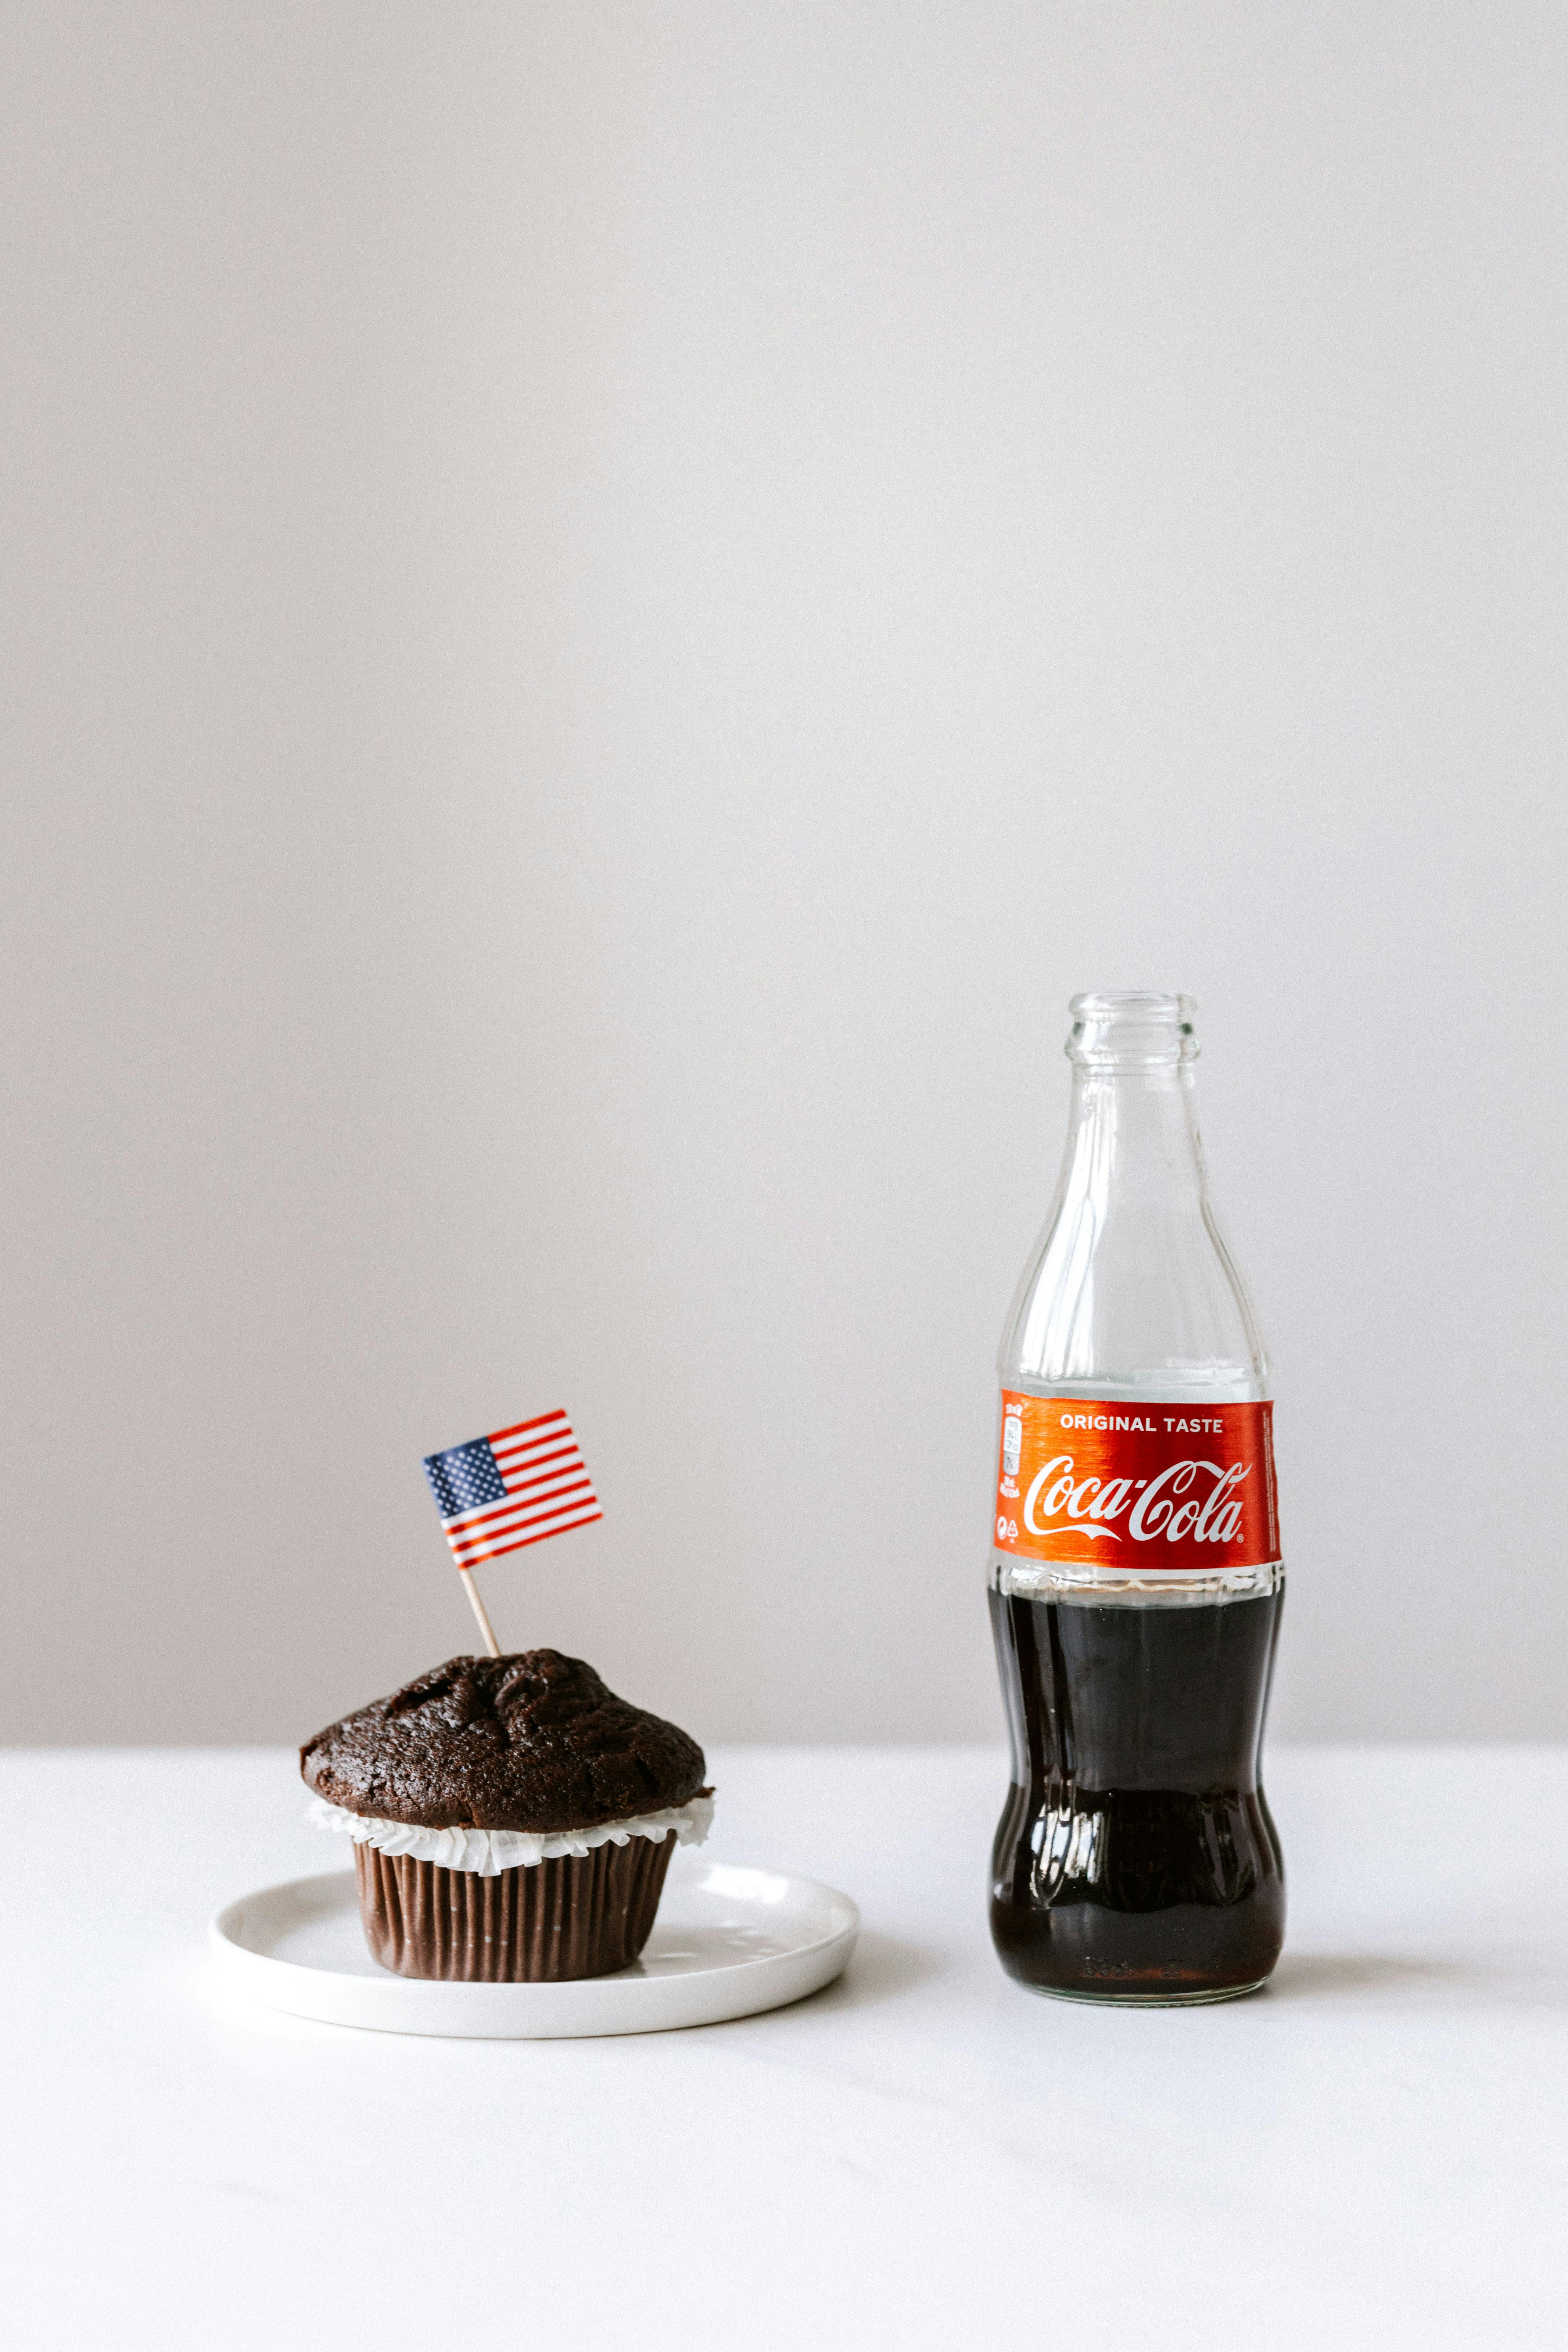 muffin with miniature us flag and coke bottle placed on white table